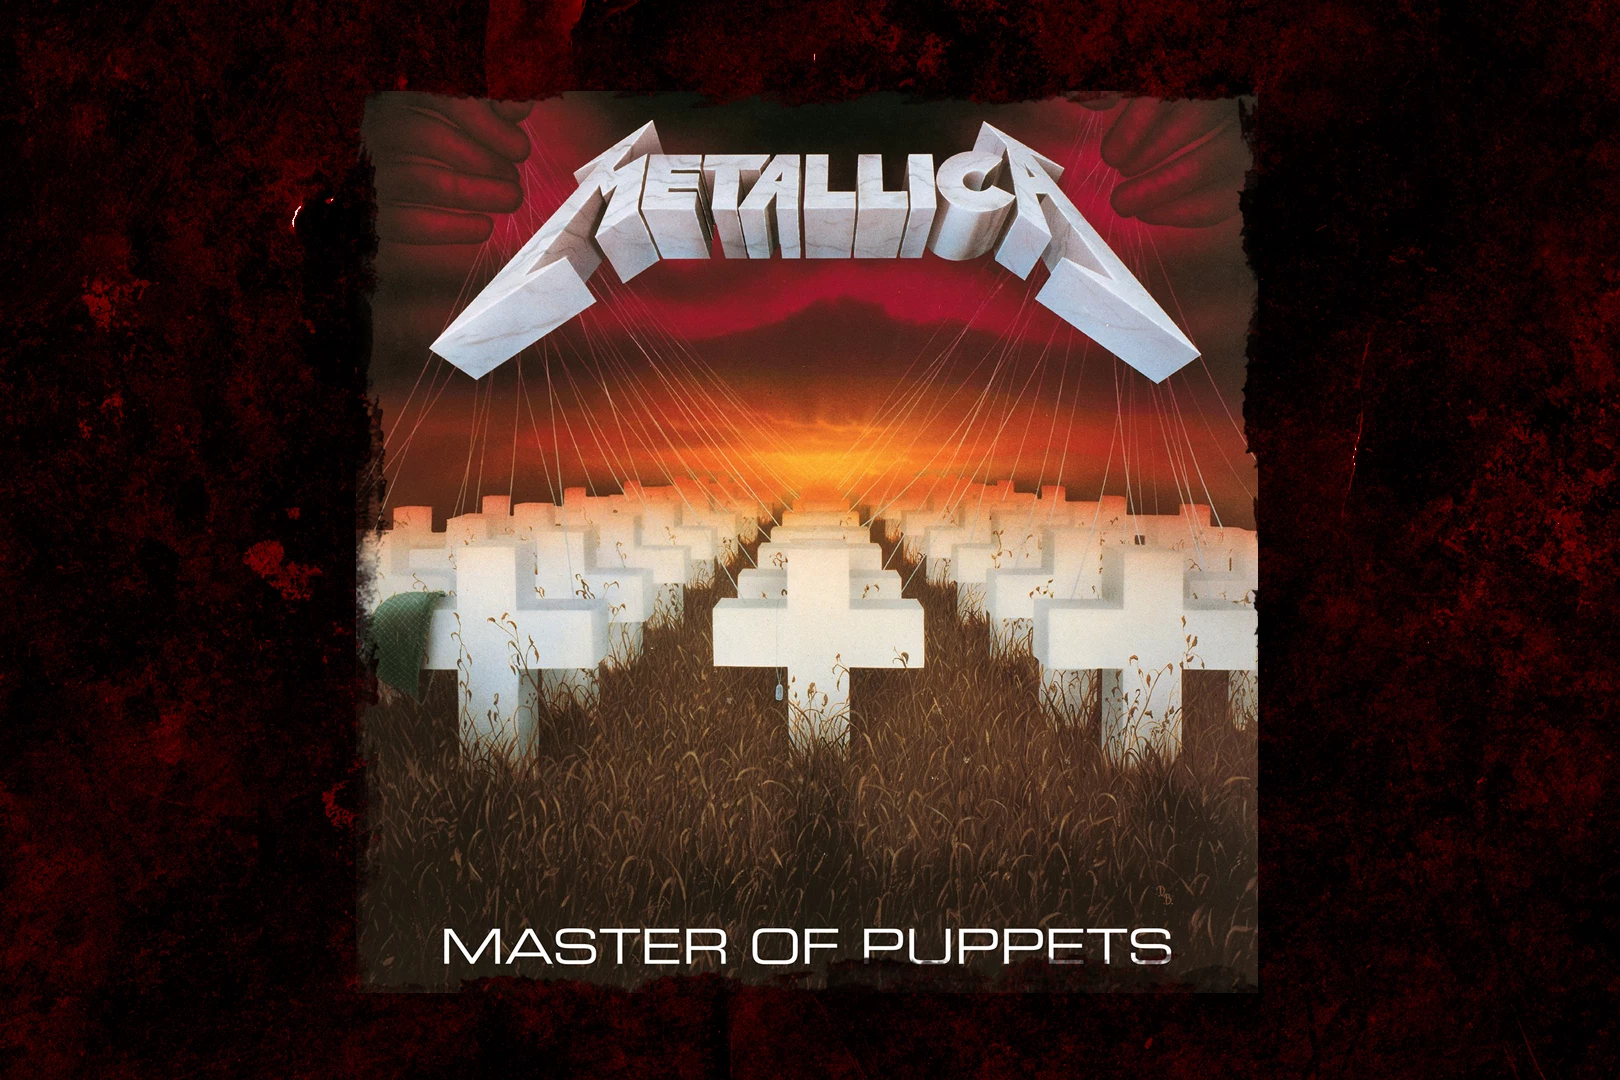 35 Years Ago: Metallica Release 'Master of Puppets'